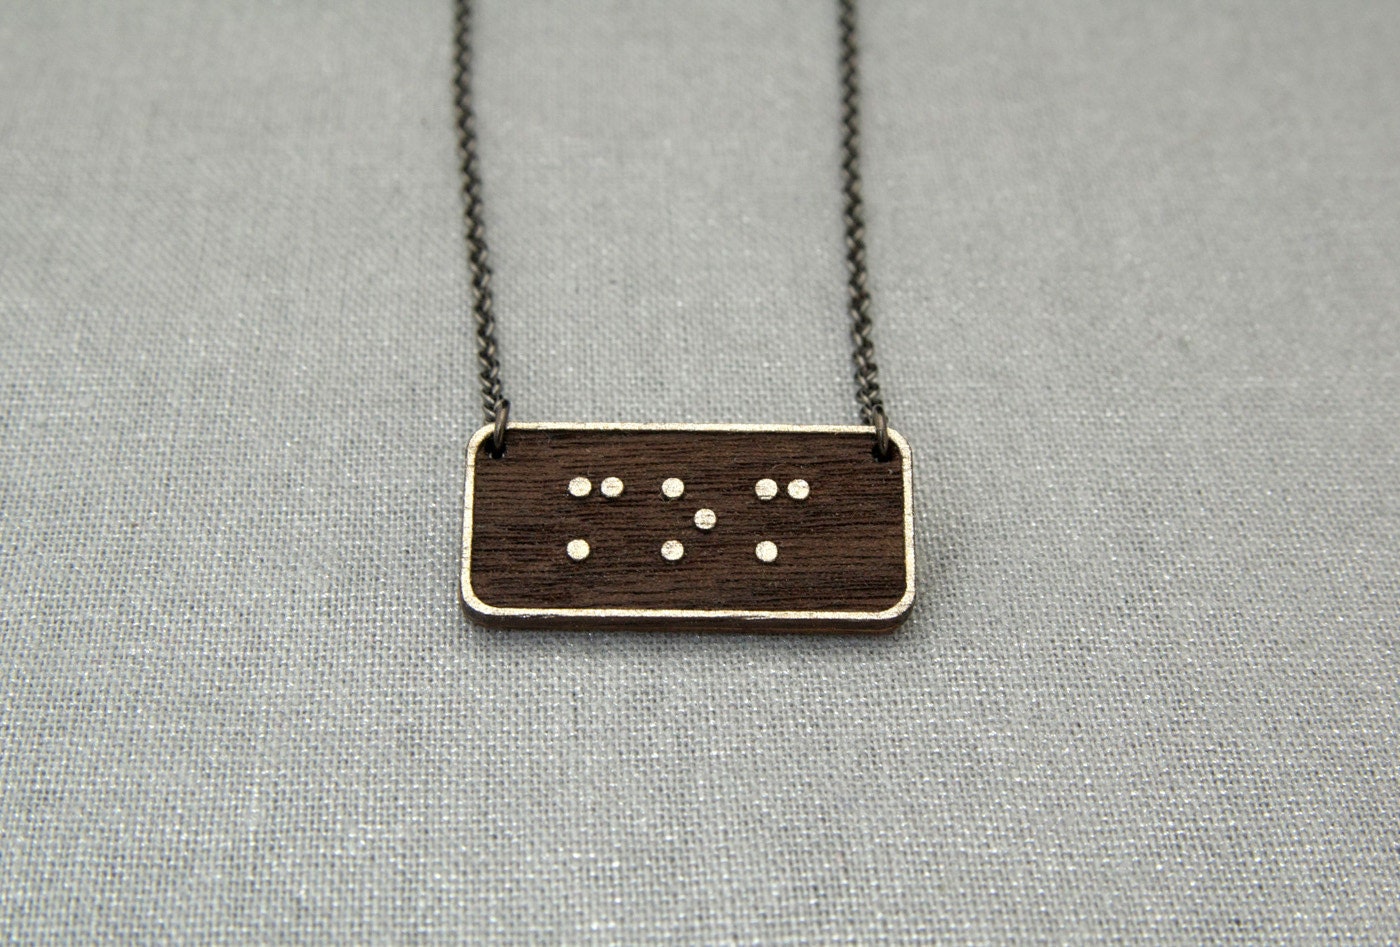 Mother's Day "Mom / Love" Reversible Braille Message Necklace in Walnut on Gunmetal Chain - birdofvirtue